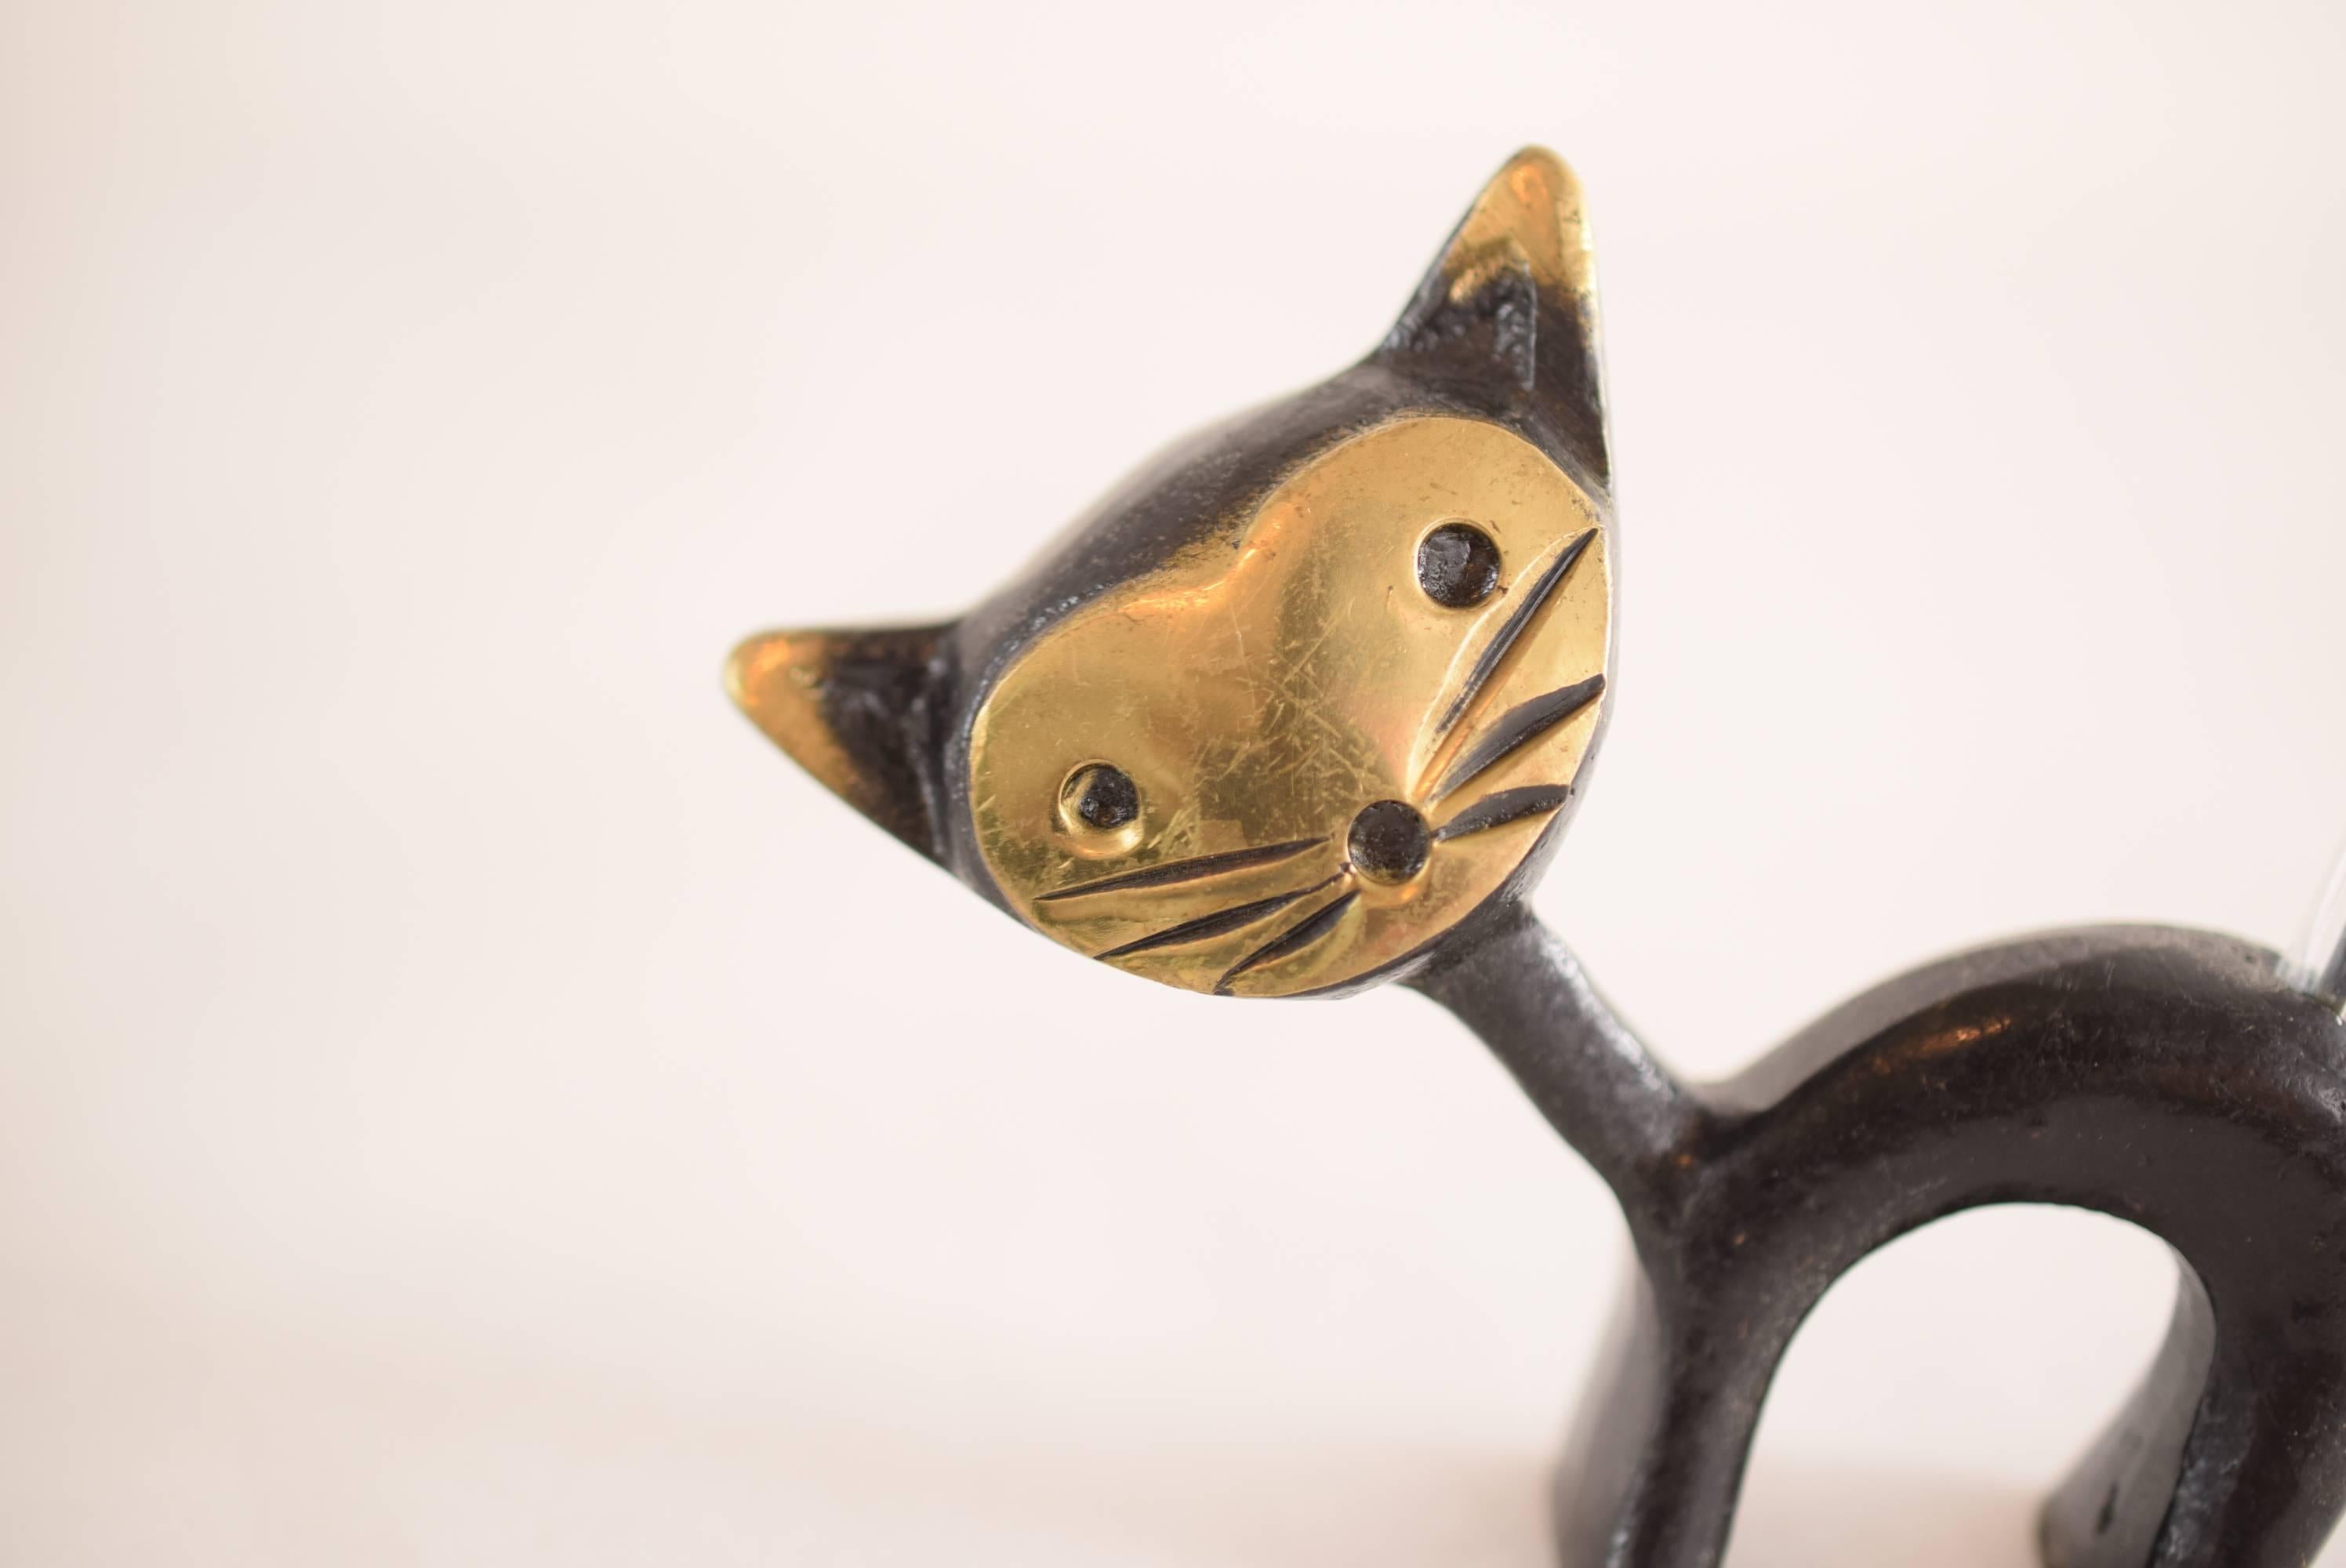 Only One cat pencile holder by Walter Bosse.
Original condition.
Attention we still have 1 piece.
